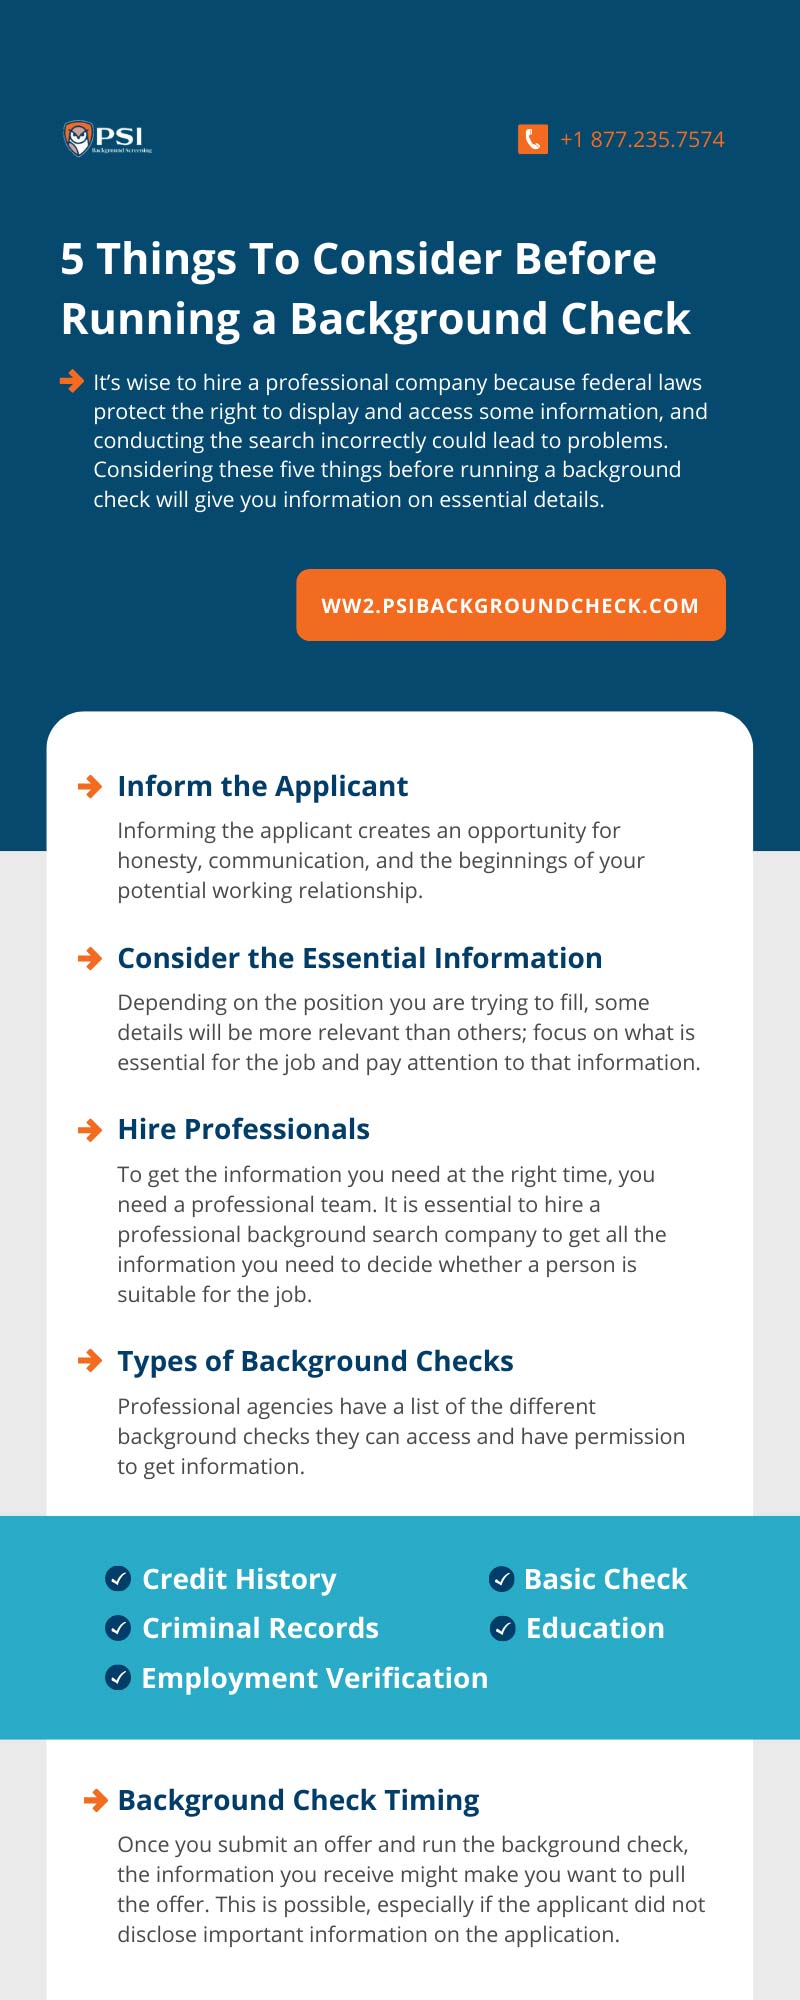 5 Things To Consider Before Running a Background Check